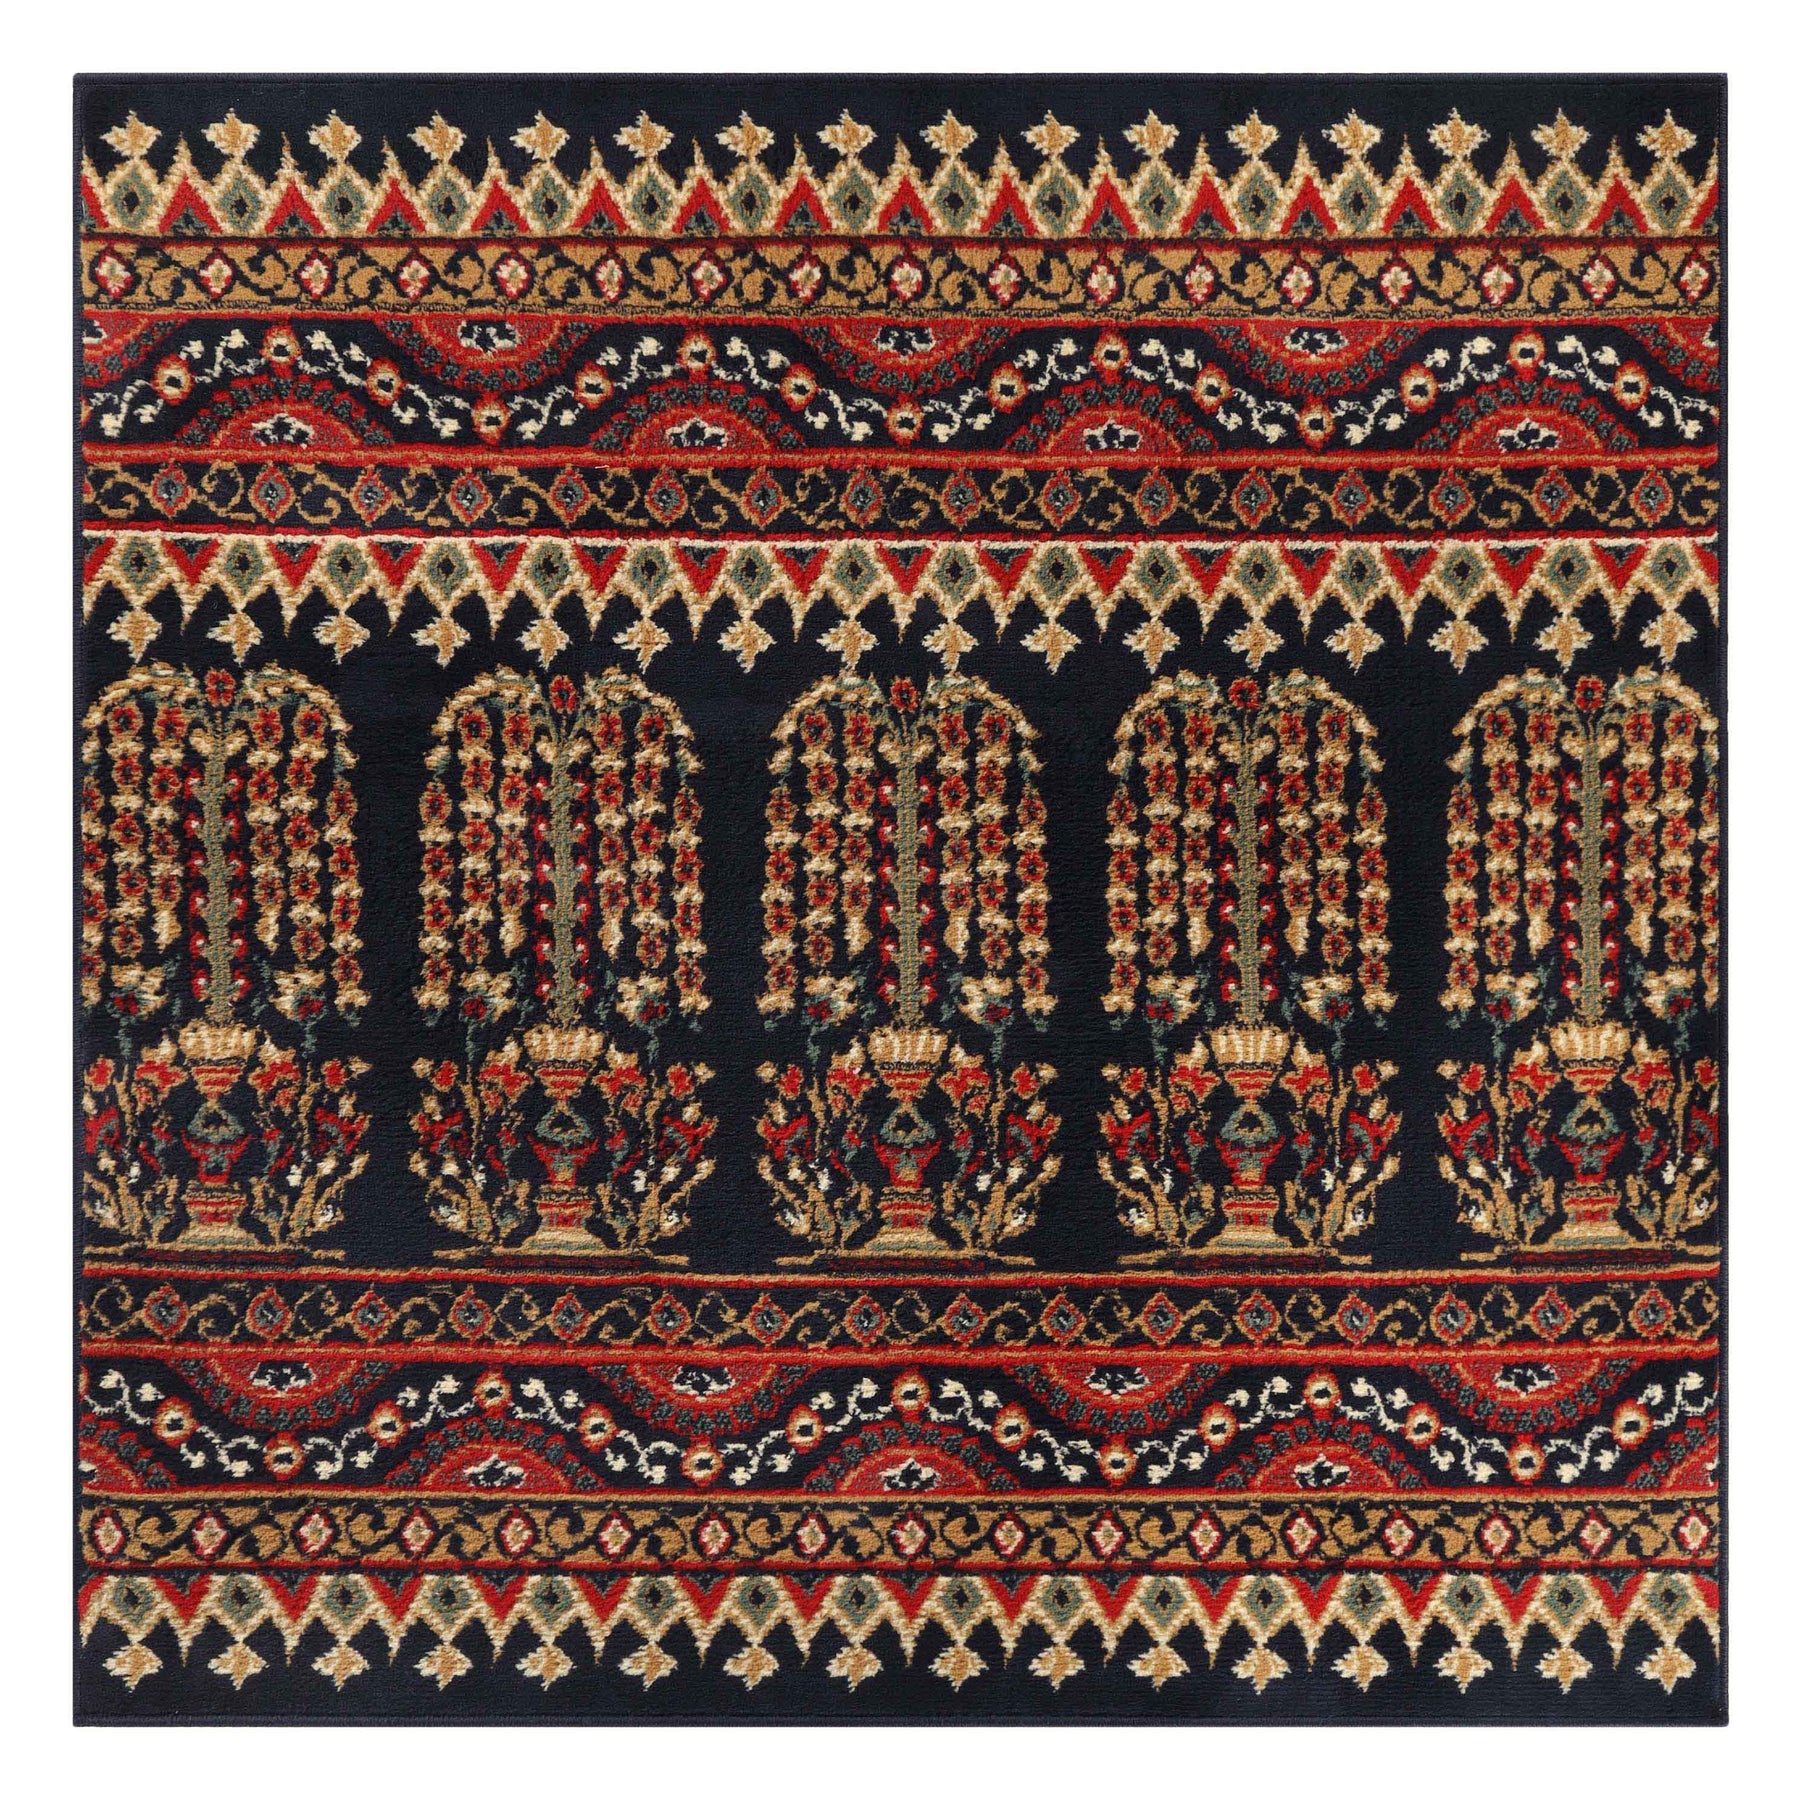 Adena Bohemian Floral Geometric Area Rug or Runner Rug - Rugs by Superior - Superior 